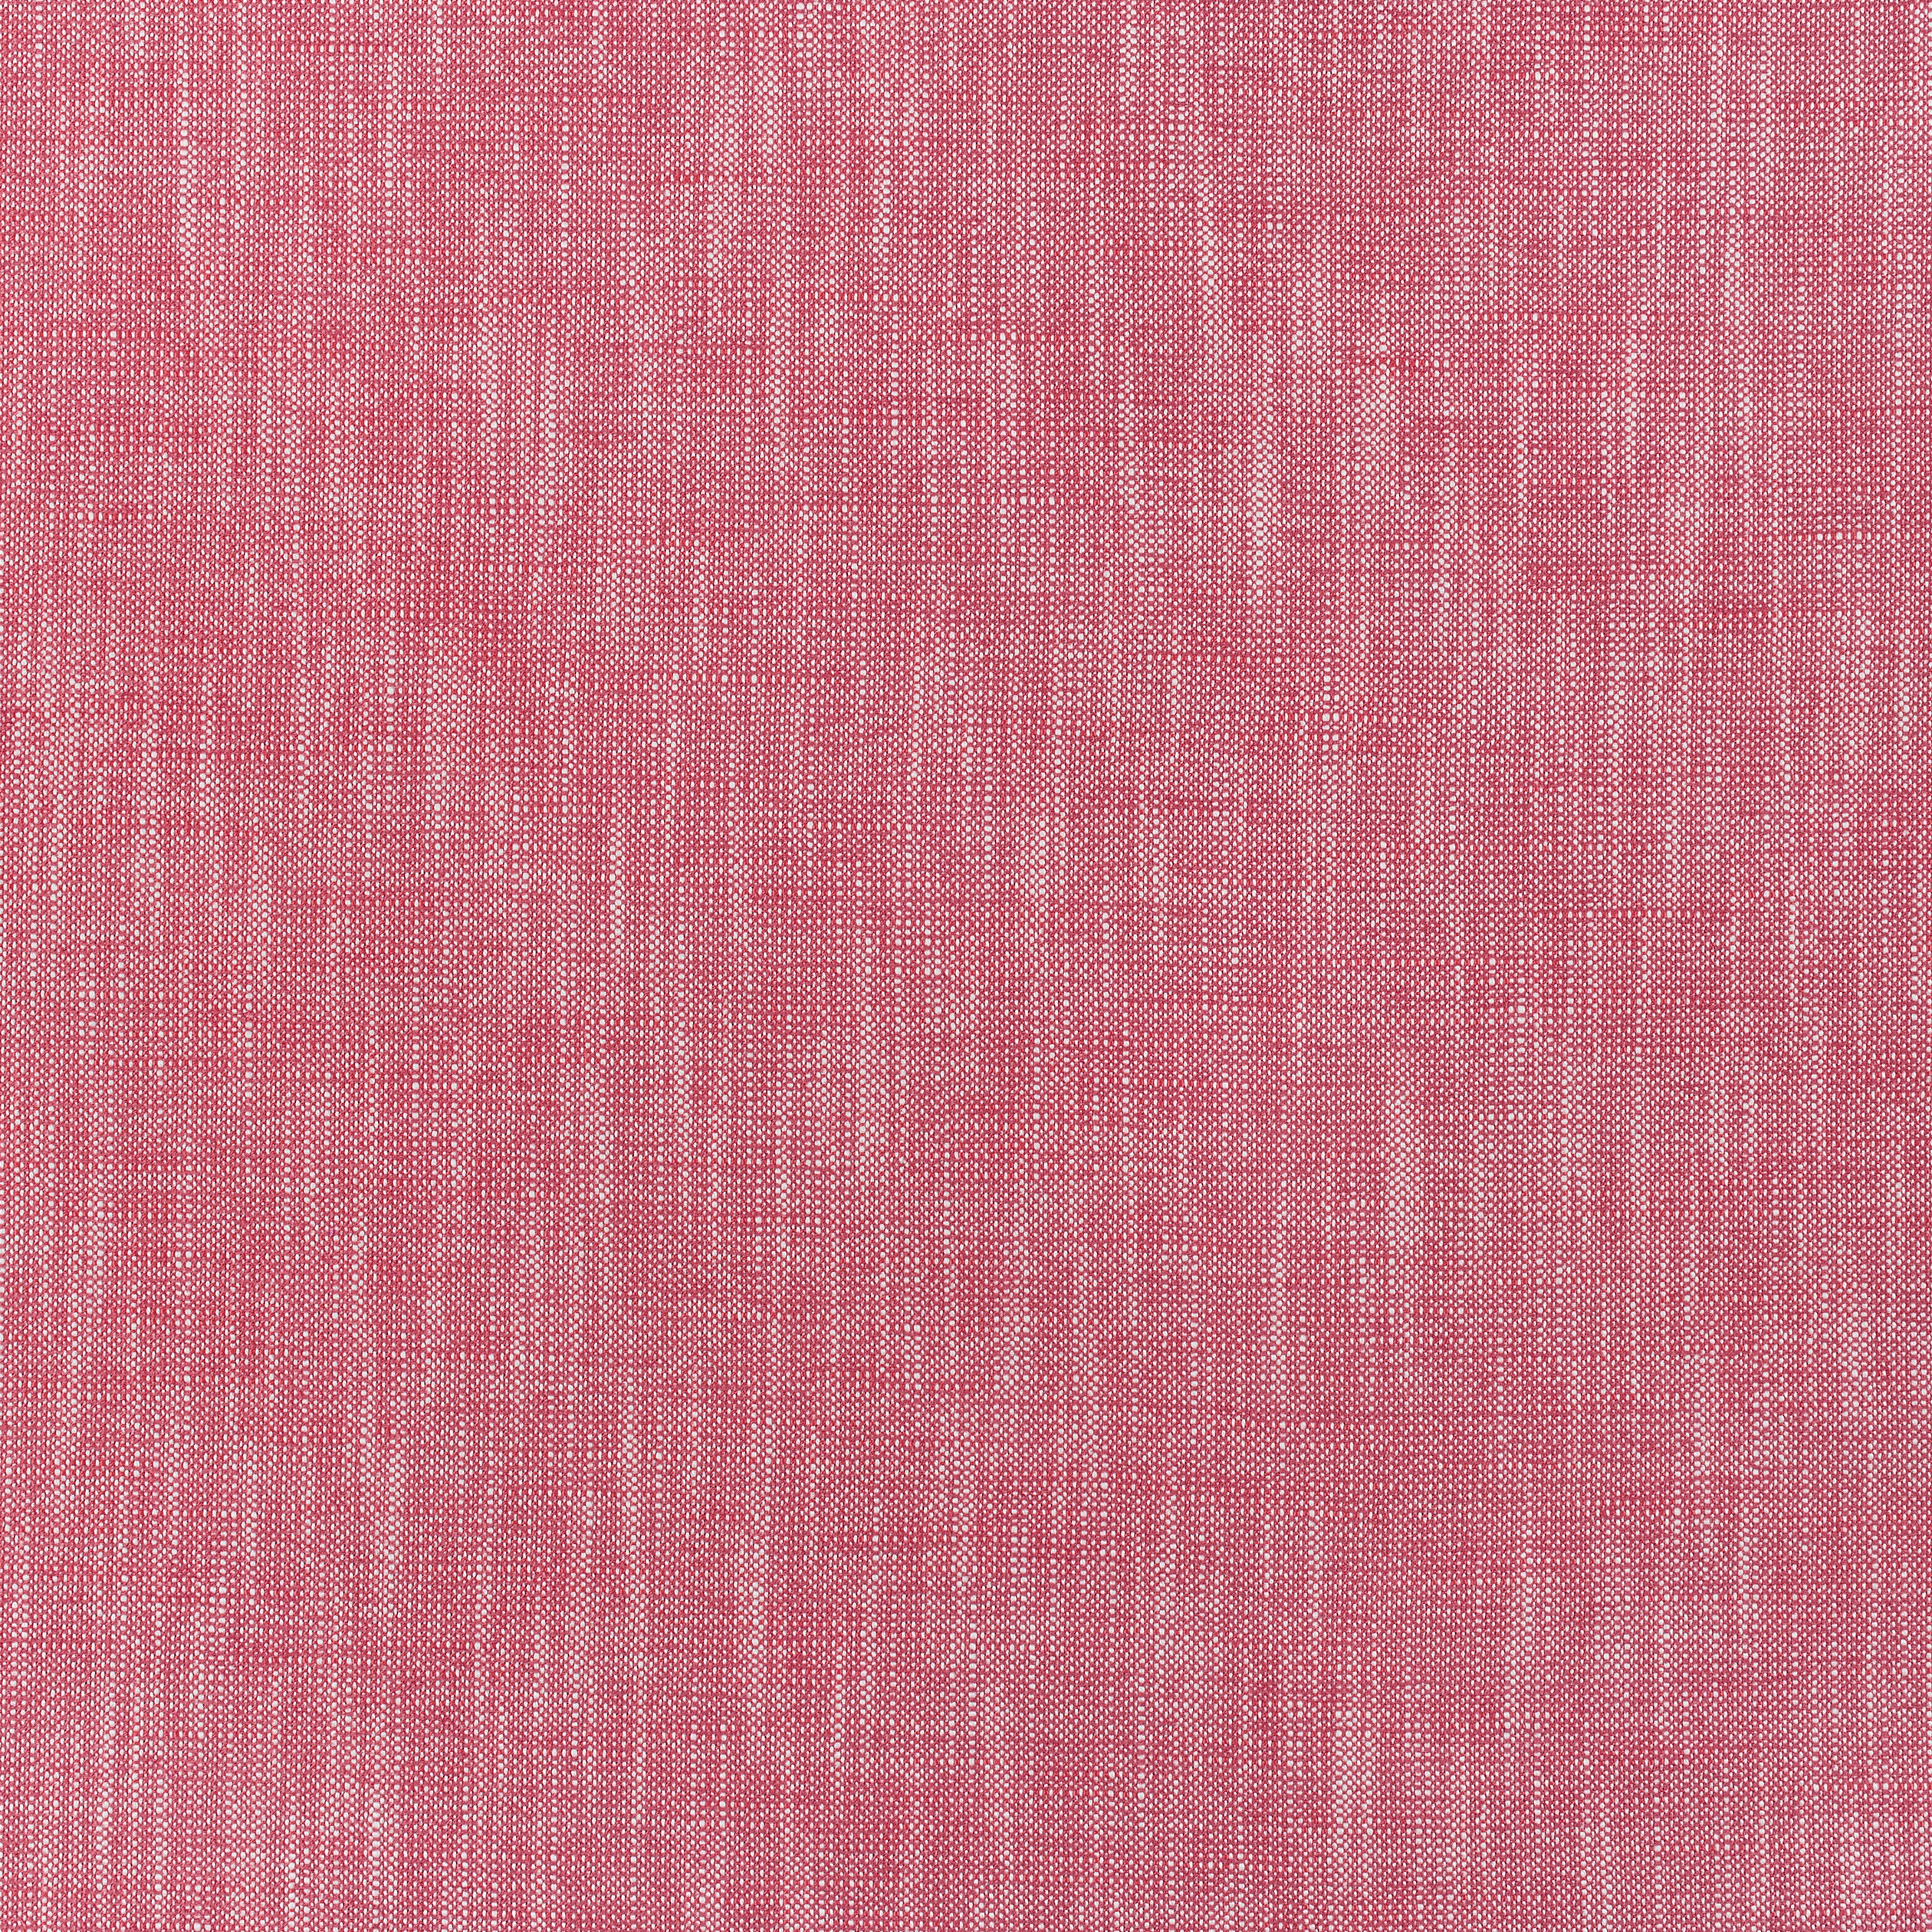 Bailey fabric in peony color - pattern number W80500 - by Thibaut in the Mosaic collection